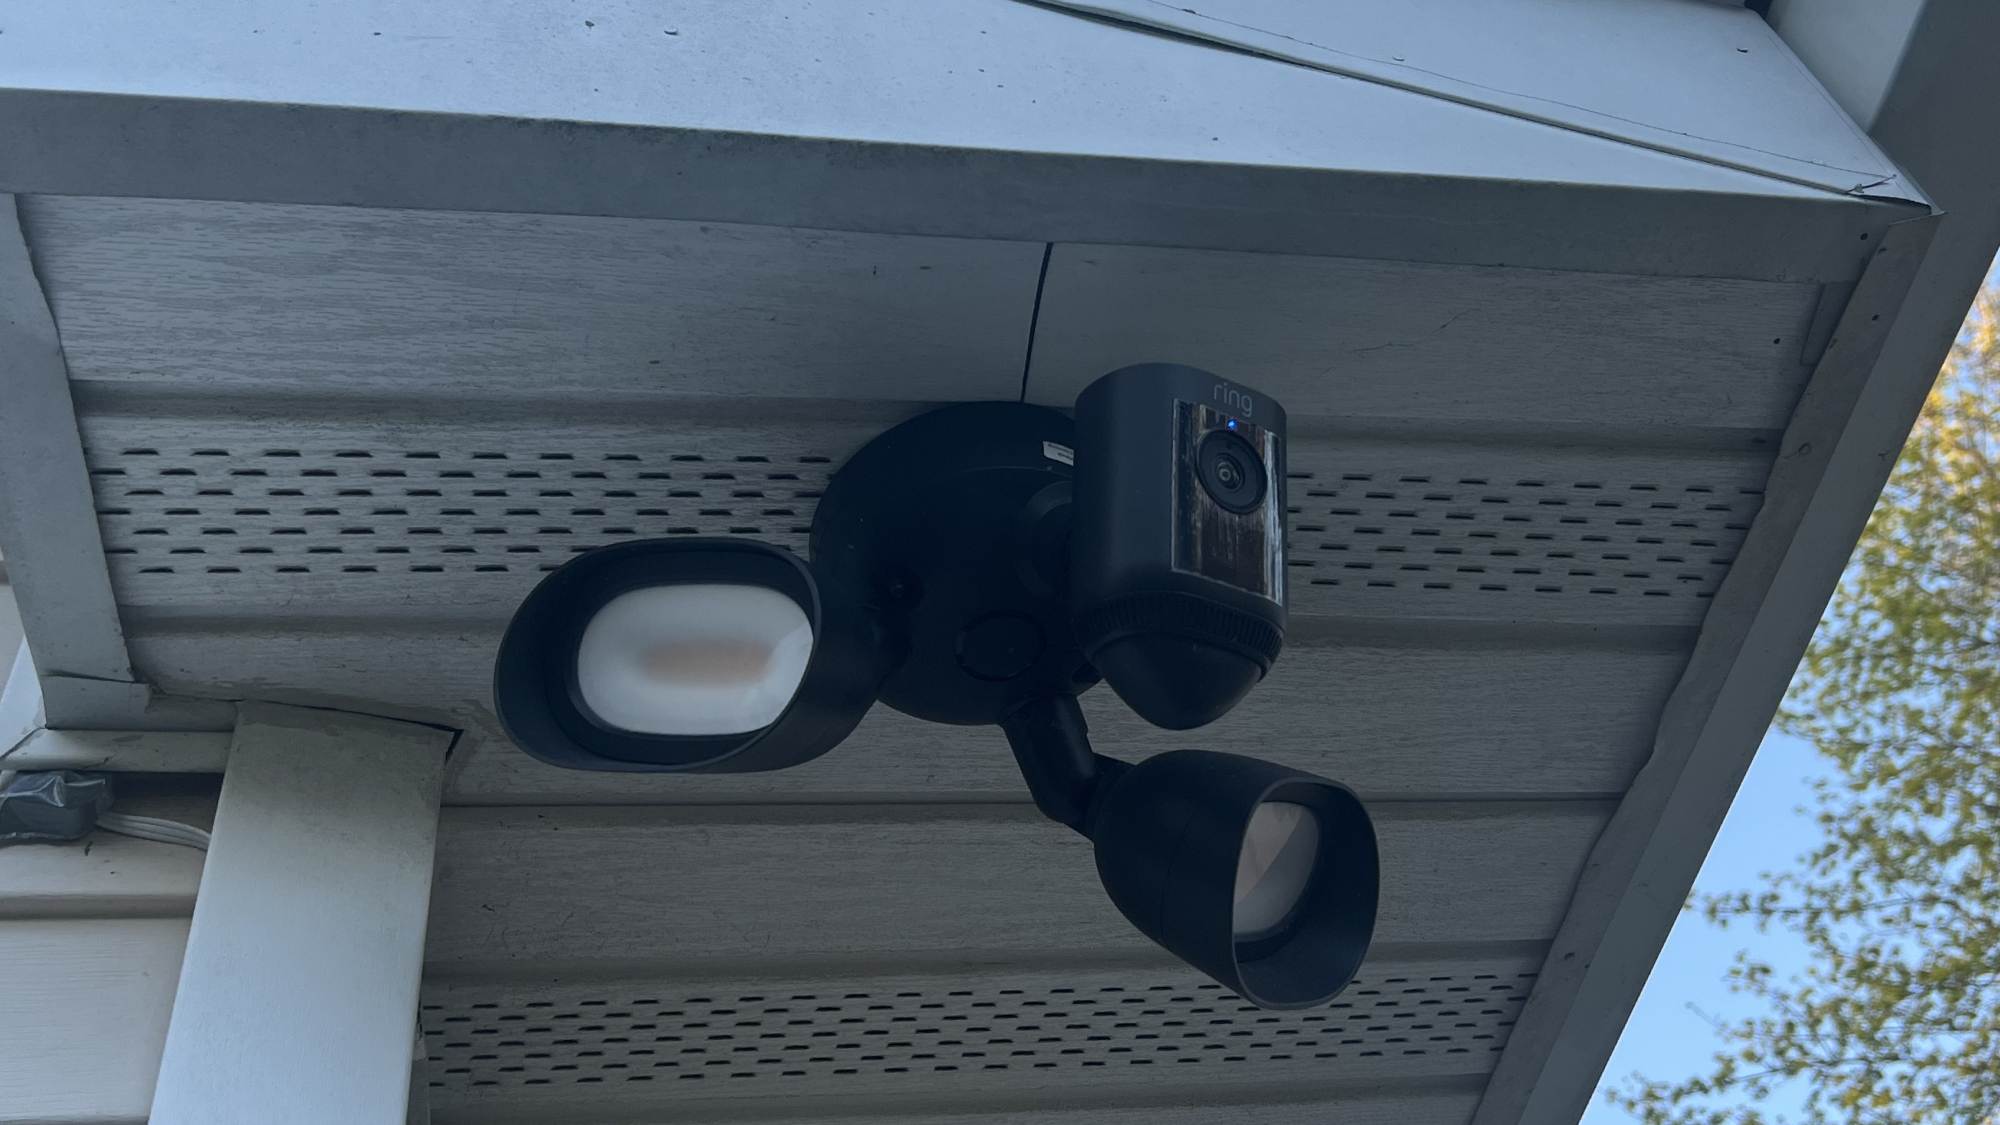 Ring Floodlight Wired Plus on apartment roof eave